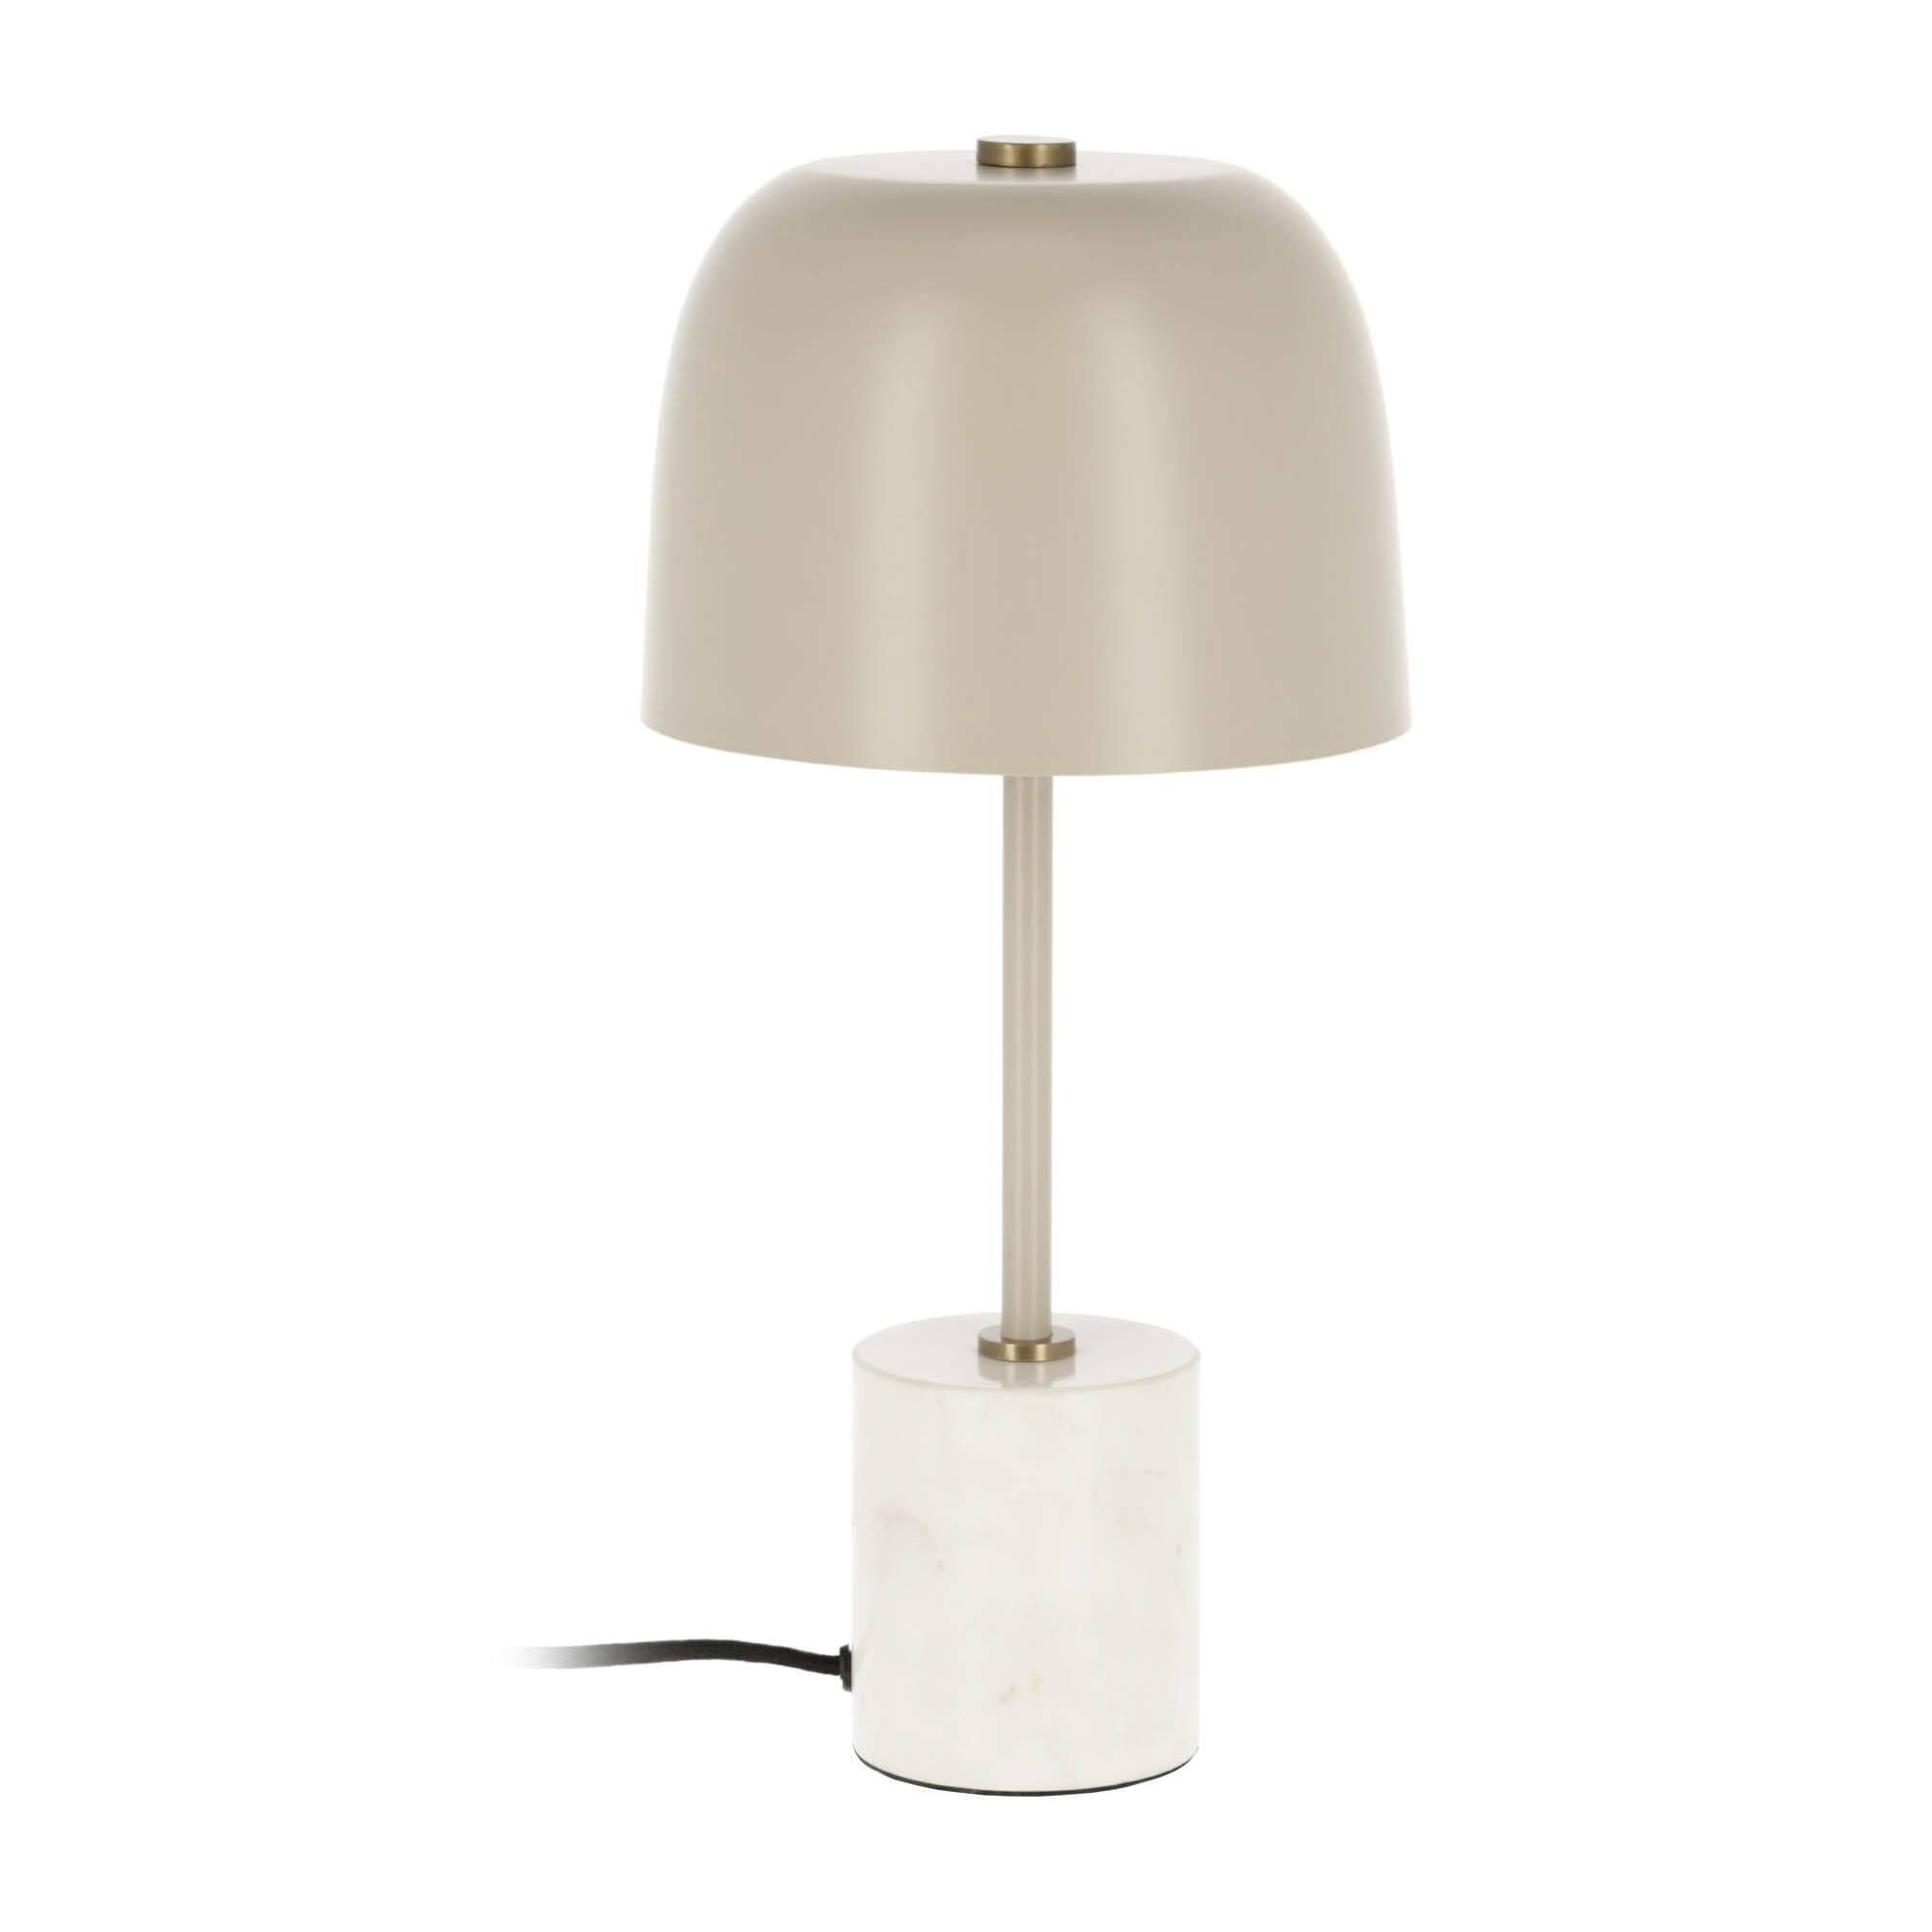 Kave Home Alish table lamp